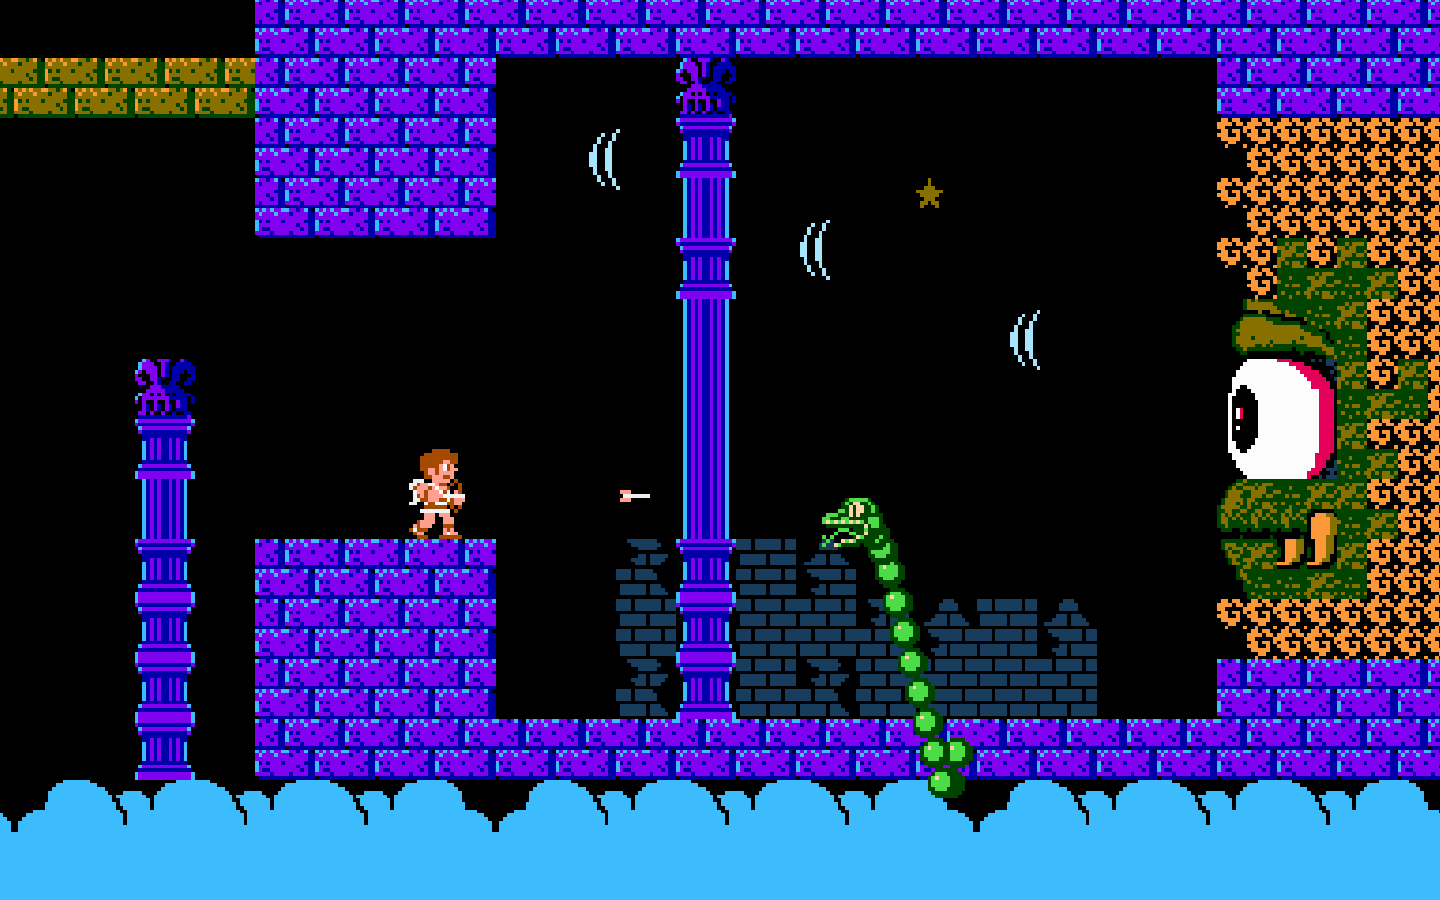 turn-to-channel-3-kid-icarus-earned-its-place-in-your-mythical-nes-library-nepa-scene